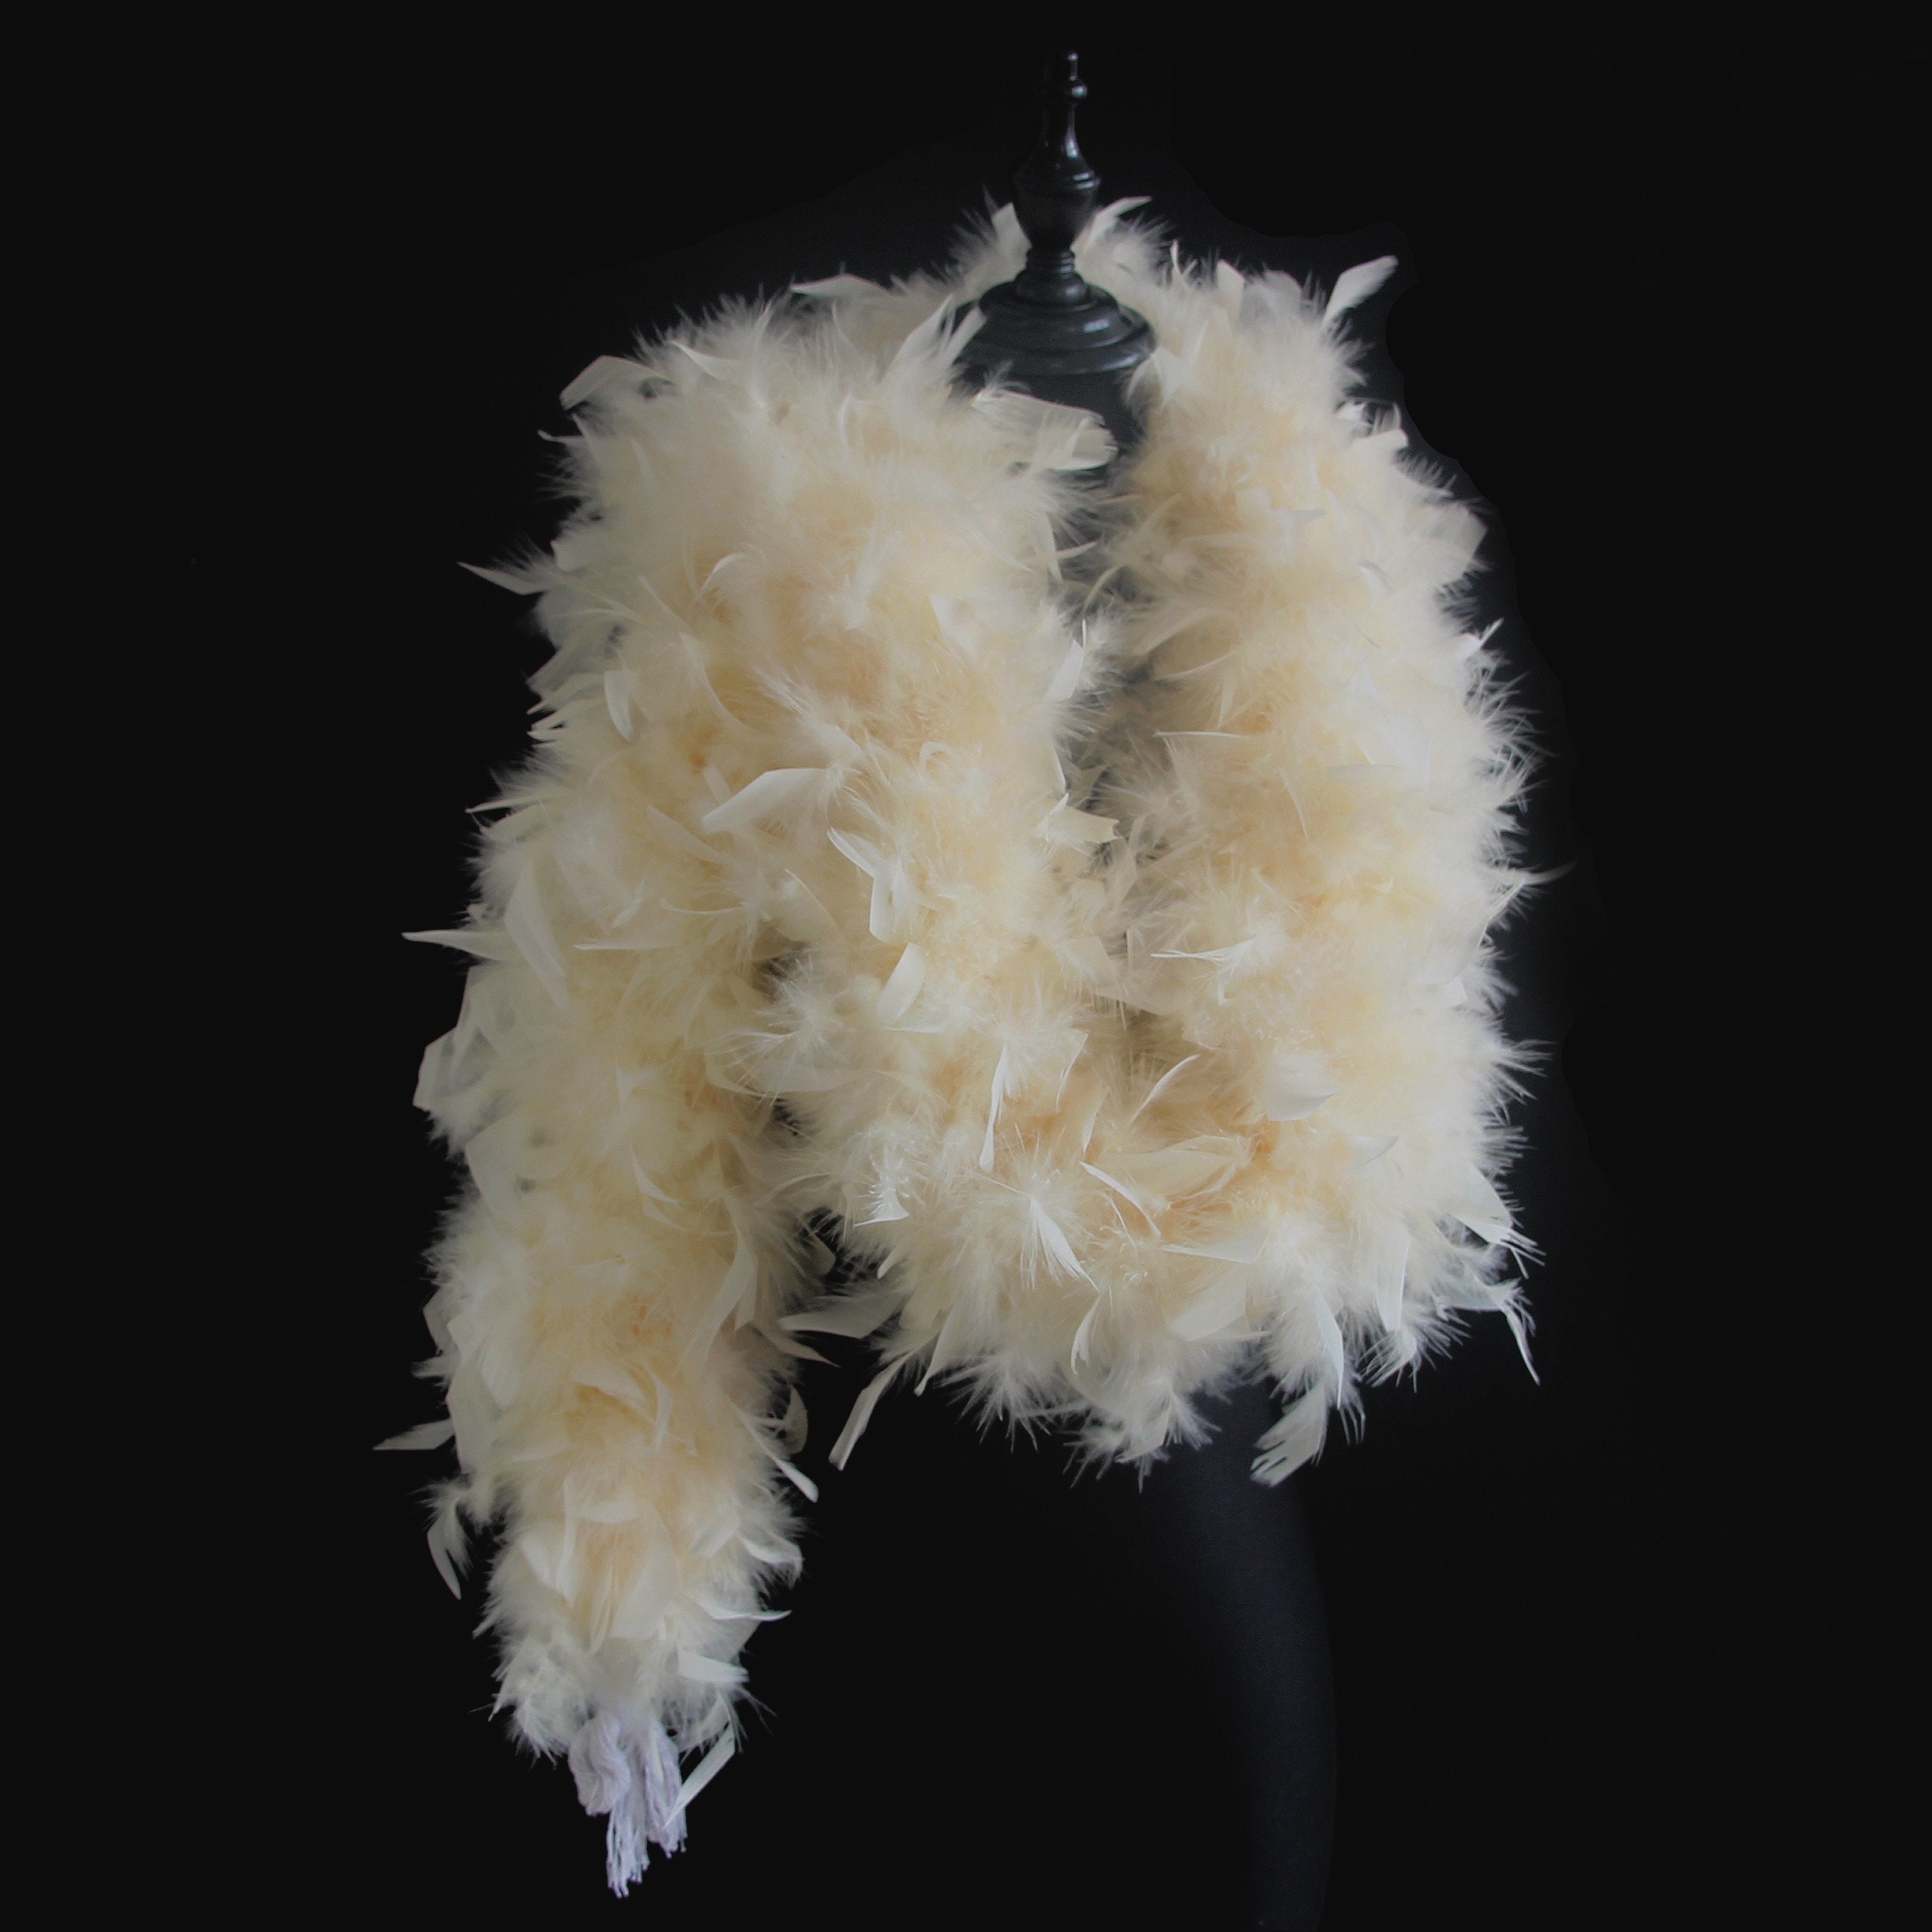 3 ply 1.5M long White Ostrich Feather Boa, High Quality BRAND NEW